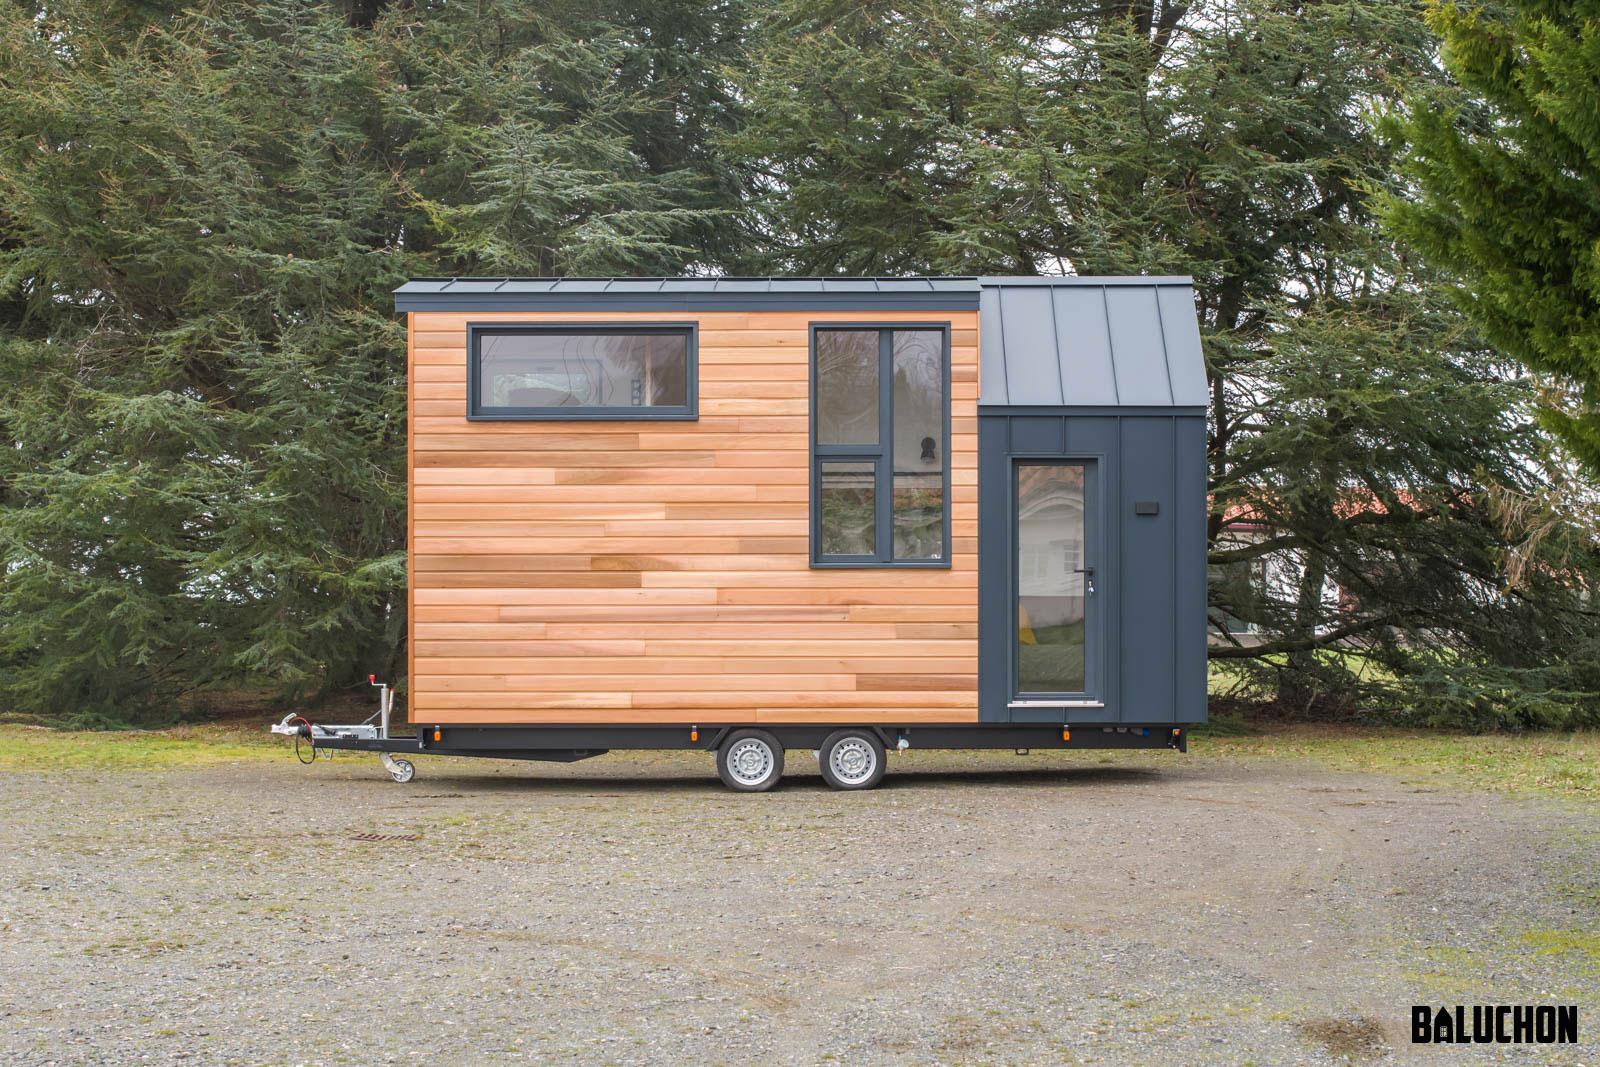 Wood and Aluminum Siding on Tiny House - Sherpa by Baluchon